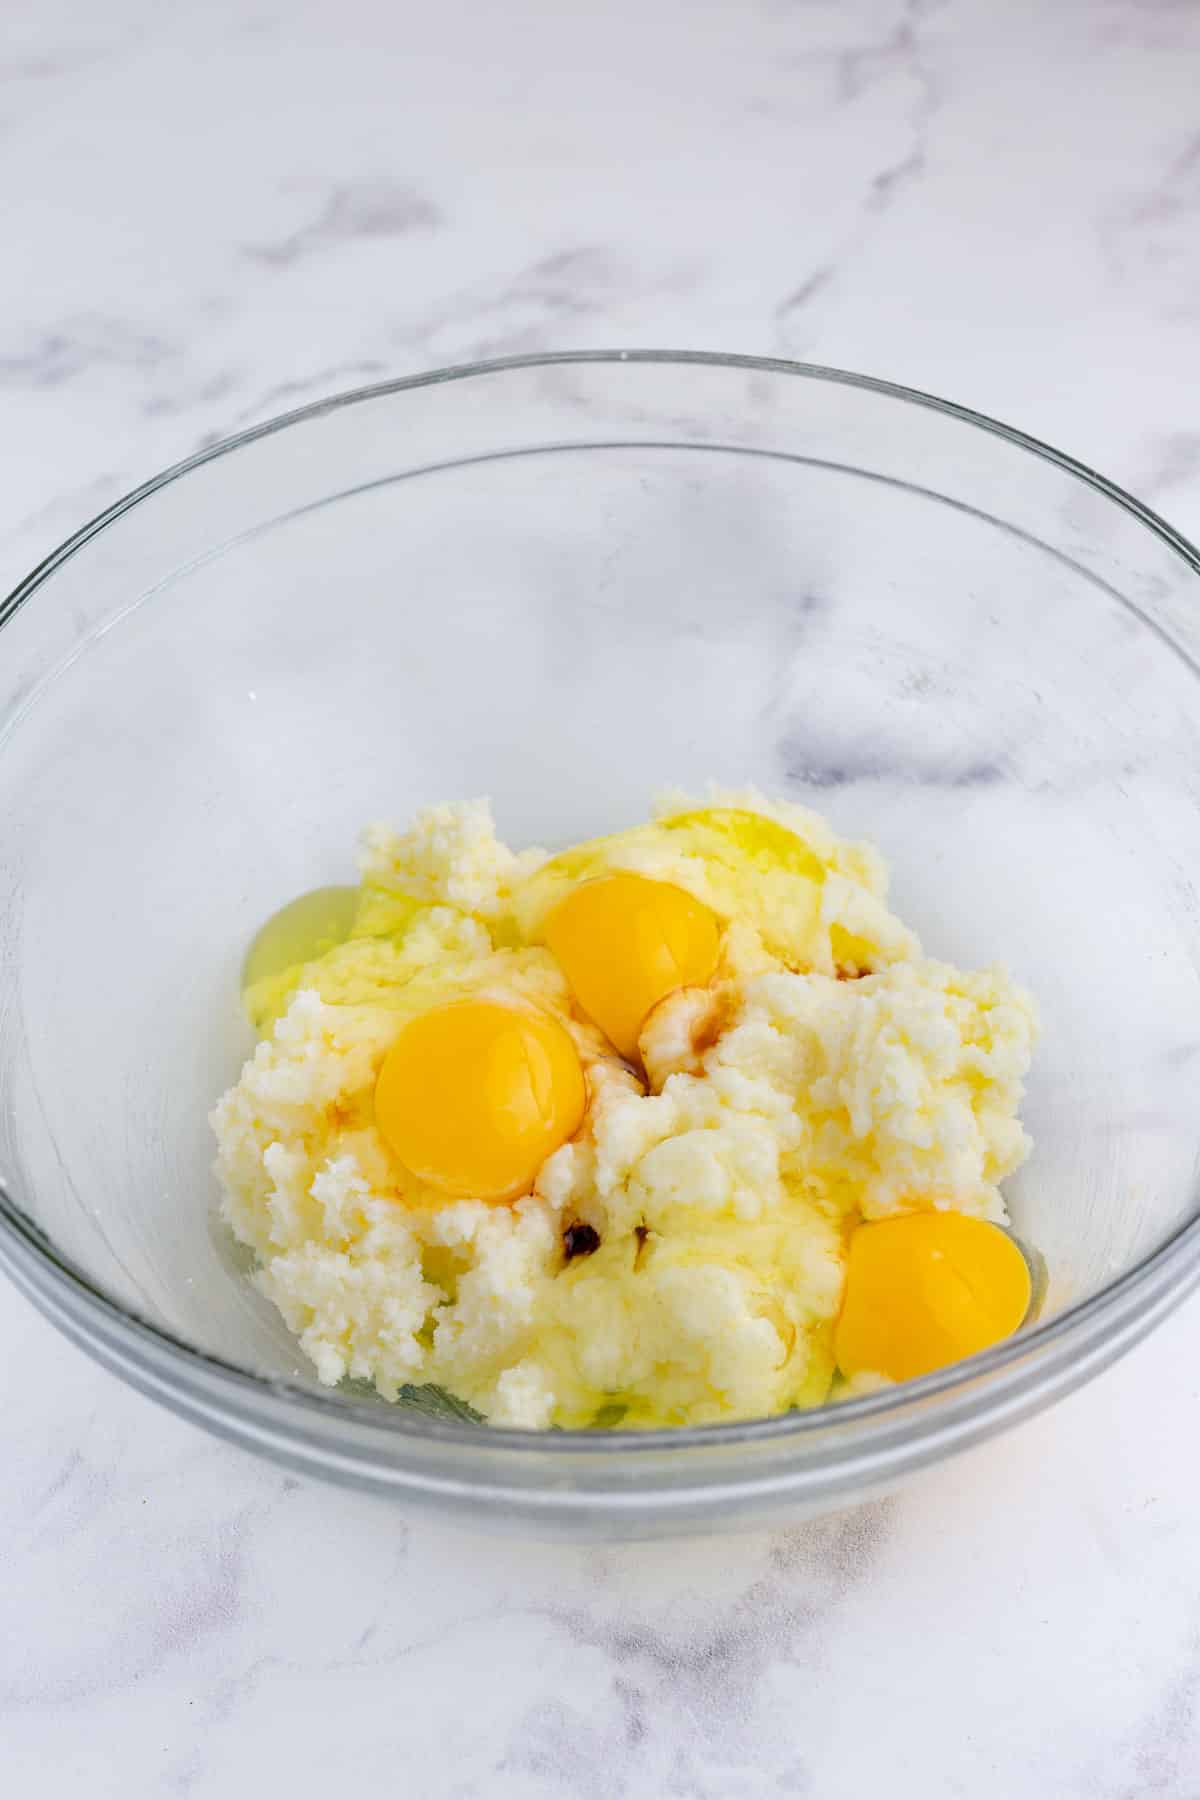 Eggs and vanilla are added to the butter mixture.